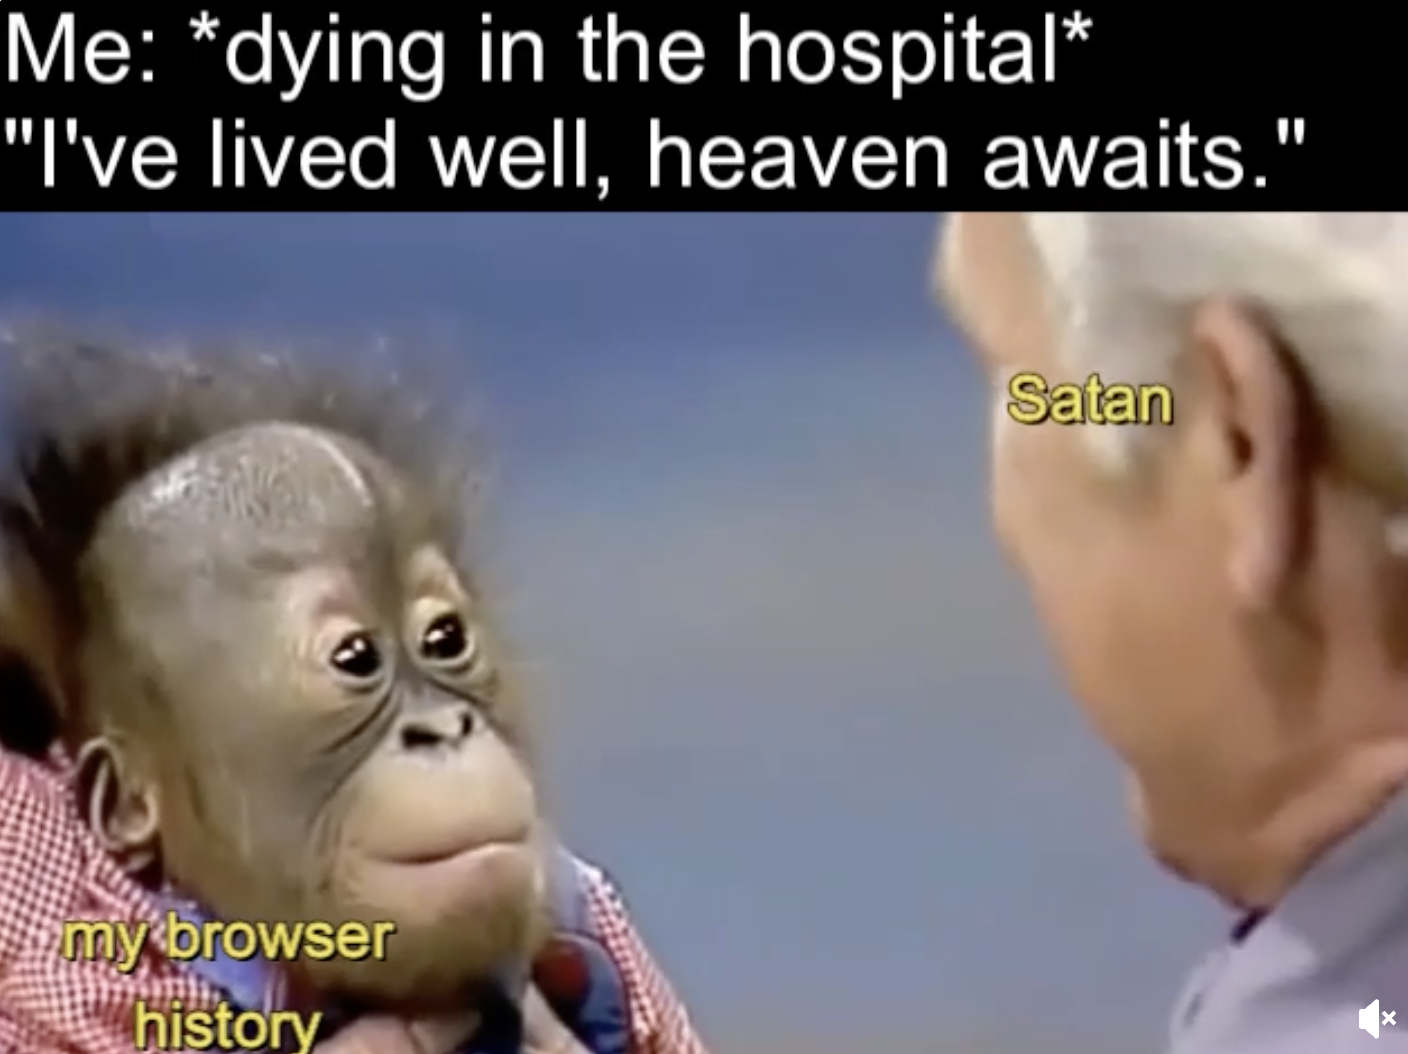 amcal - Me dying in the hospital "I've lived well, heaven awaits. my browser history Satan